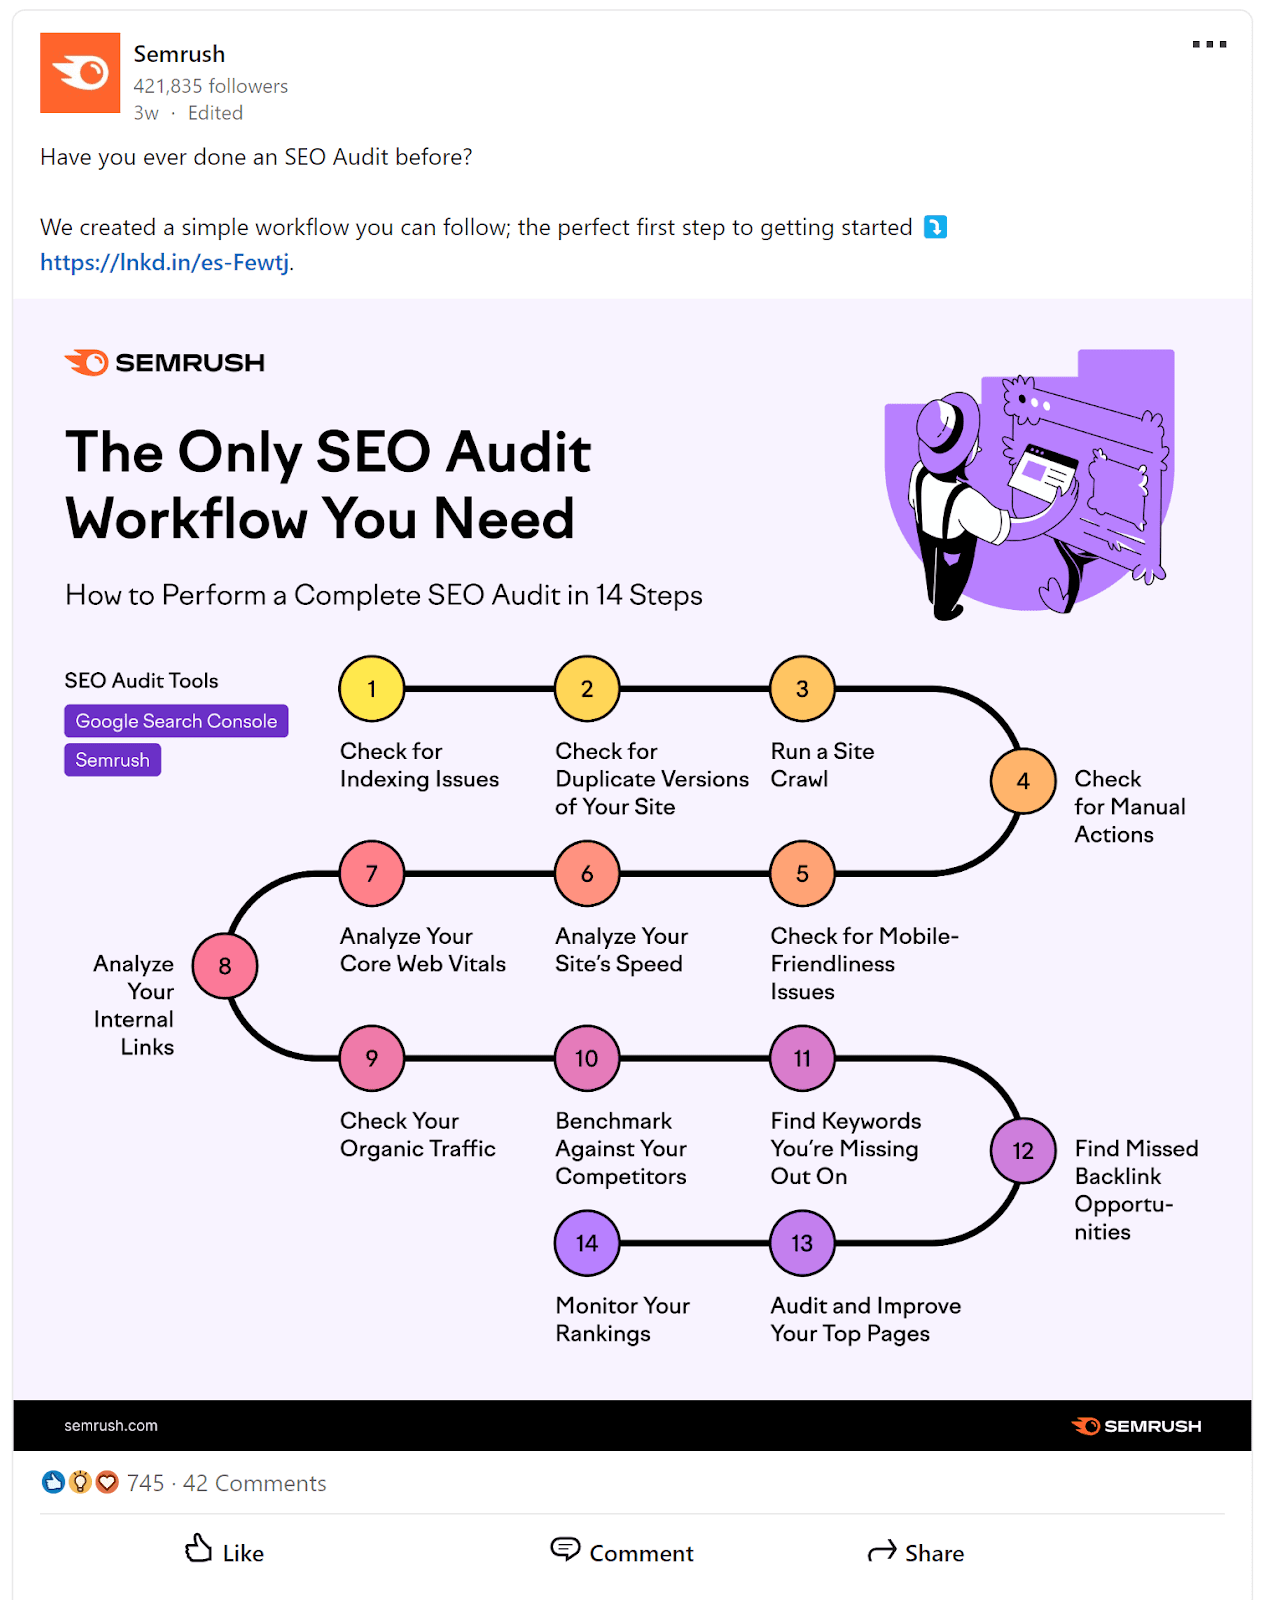 Semrush LinkedIn post showing how to do an SEO audit using an infographic.